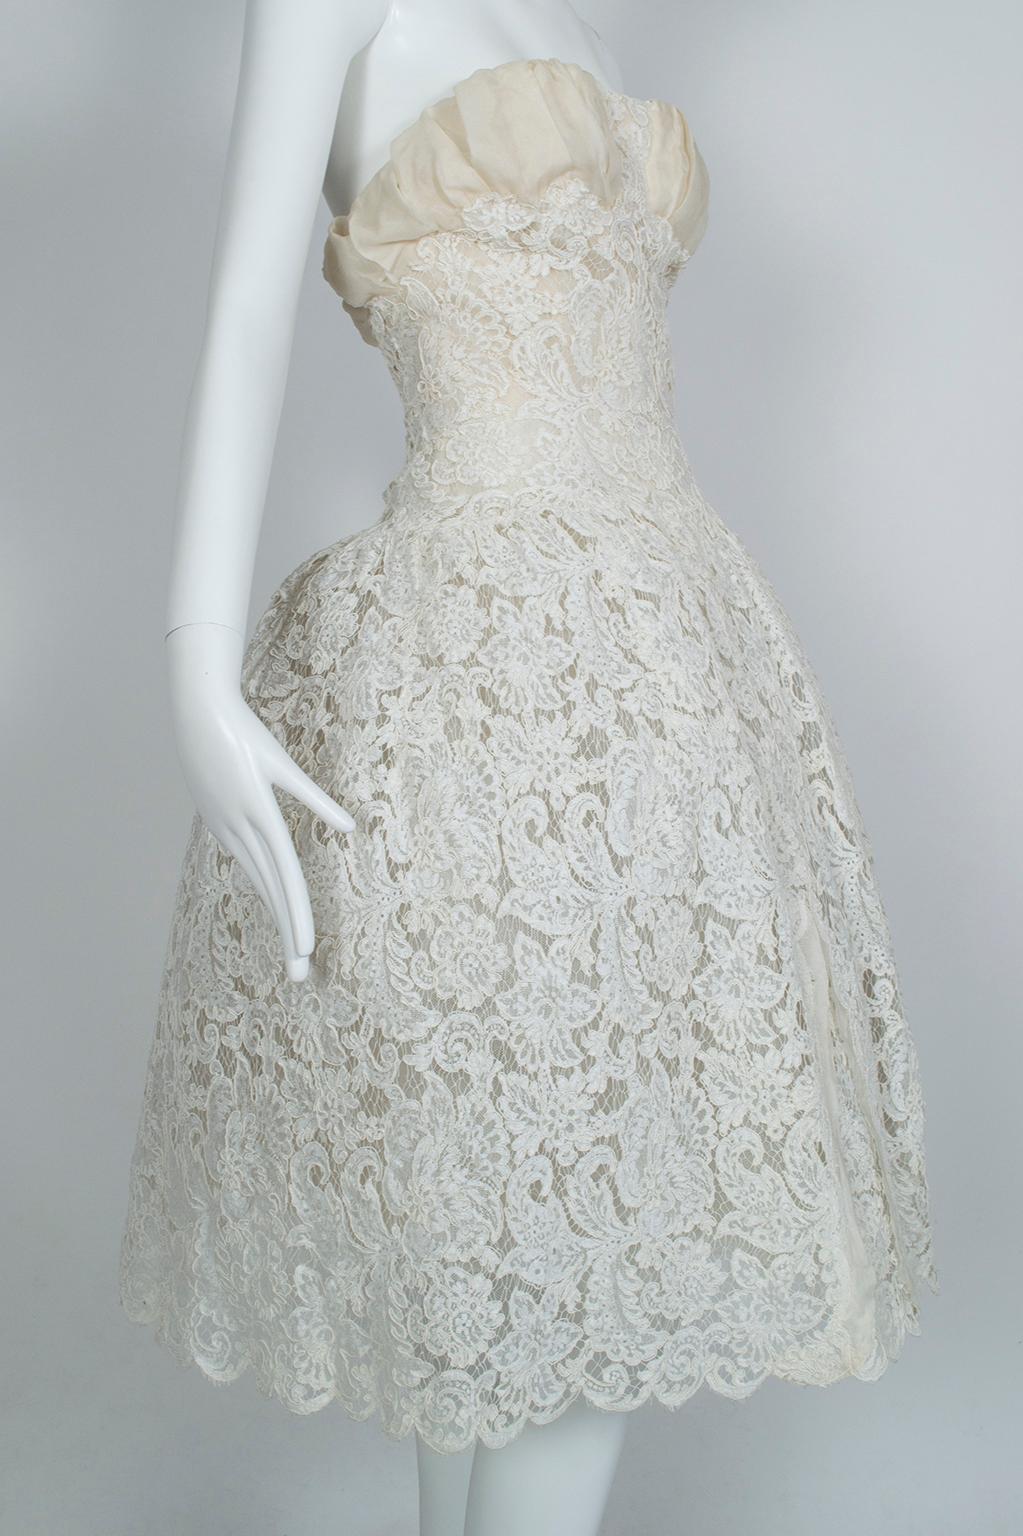 Strapless Ivory Guipure Lace Corseted Robe Française Wedding Dress - XS, 1950s 4